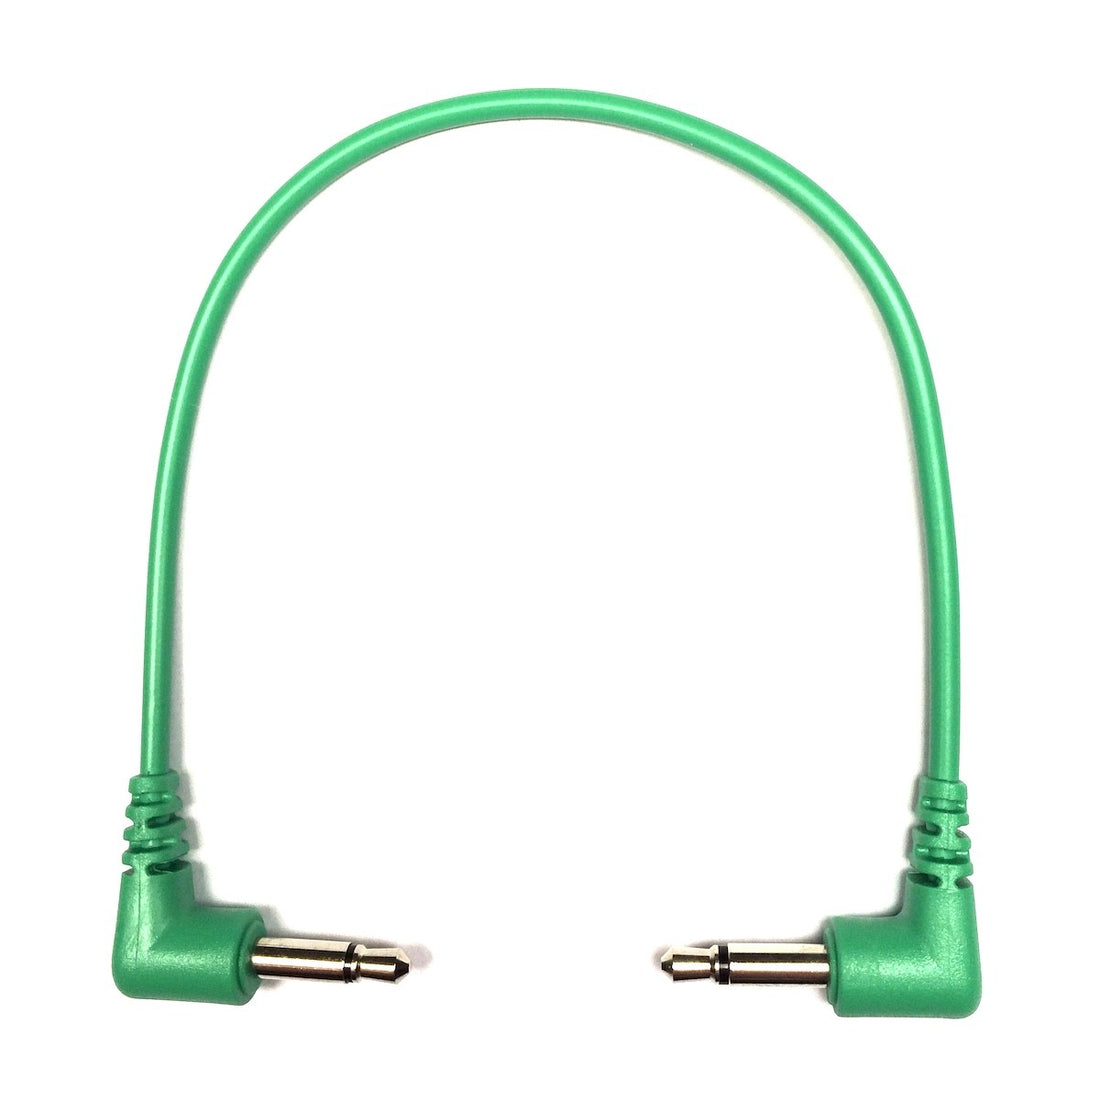 Patch Cable - Emerald 15cm